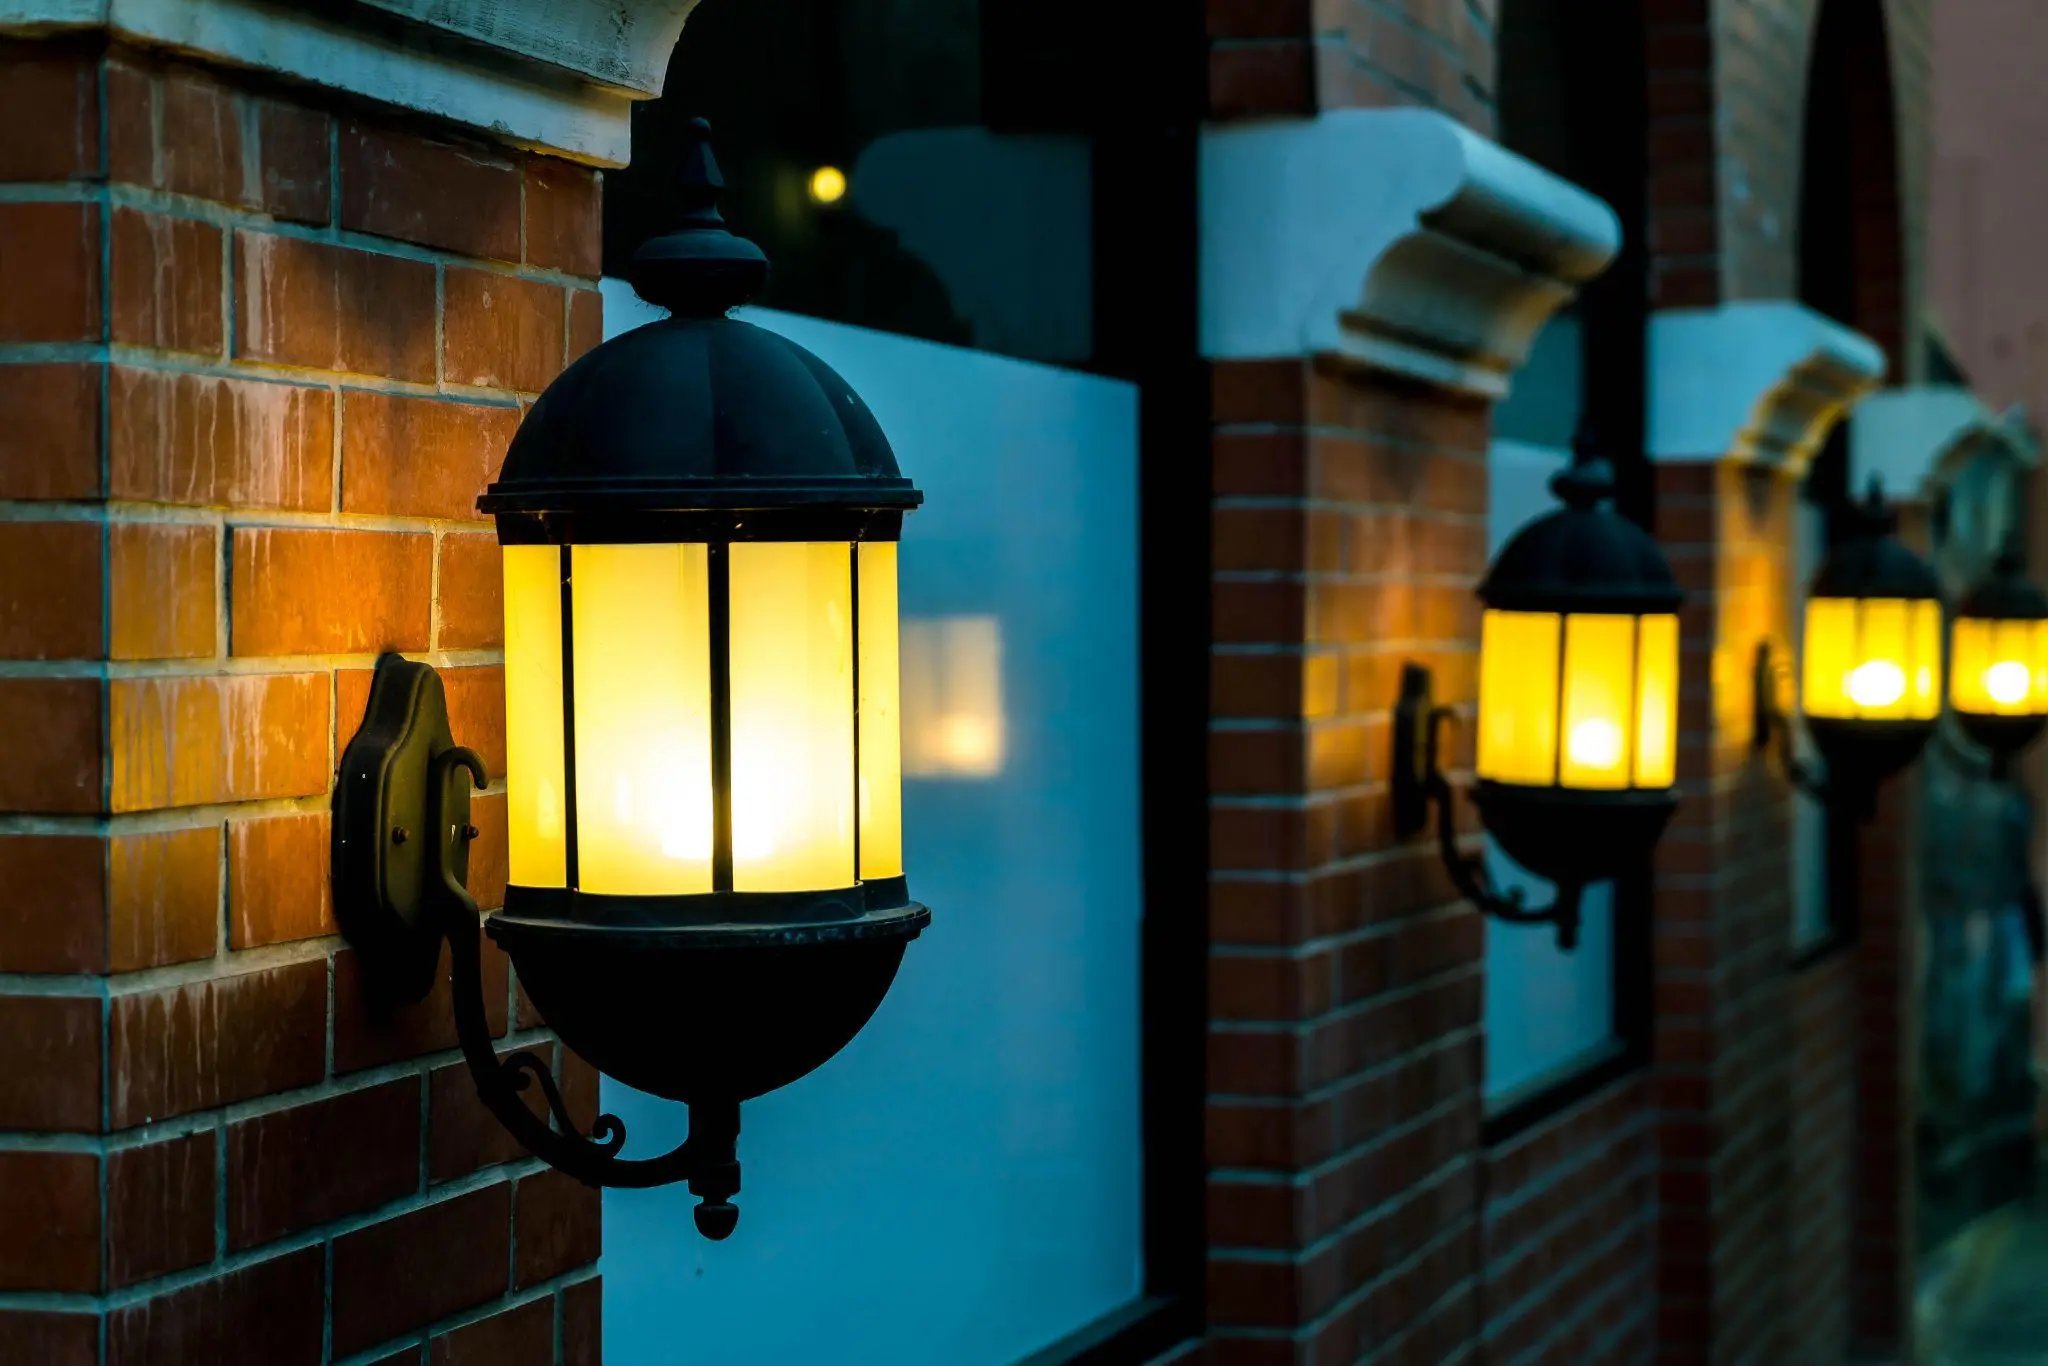 lamp against a red brick wall at night